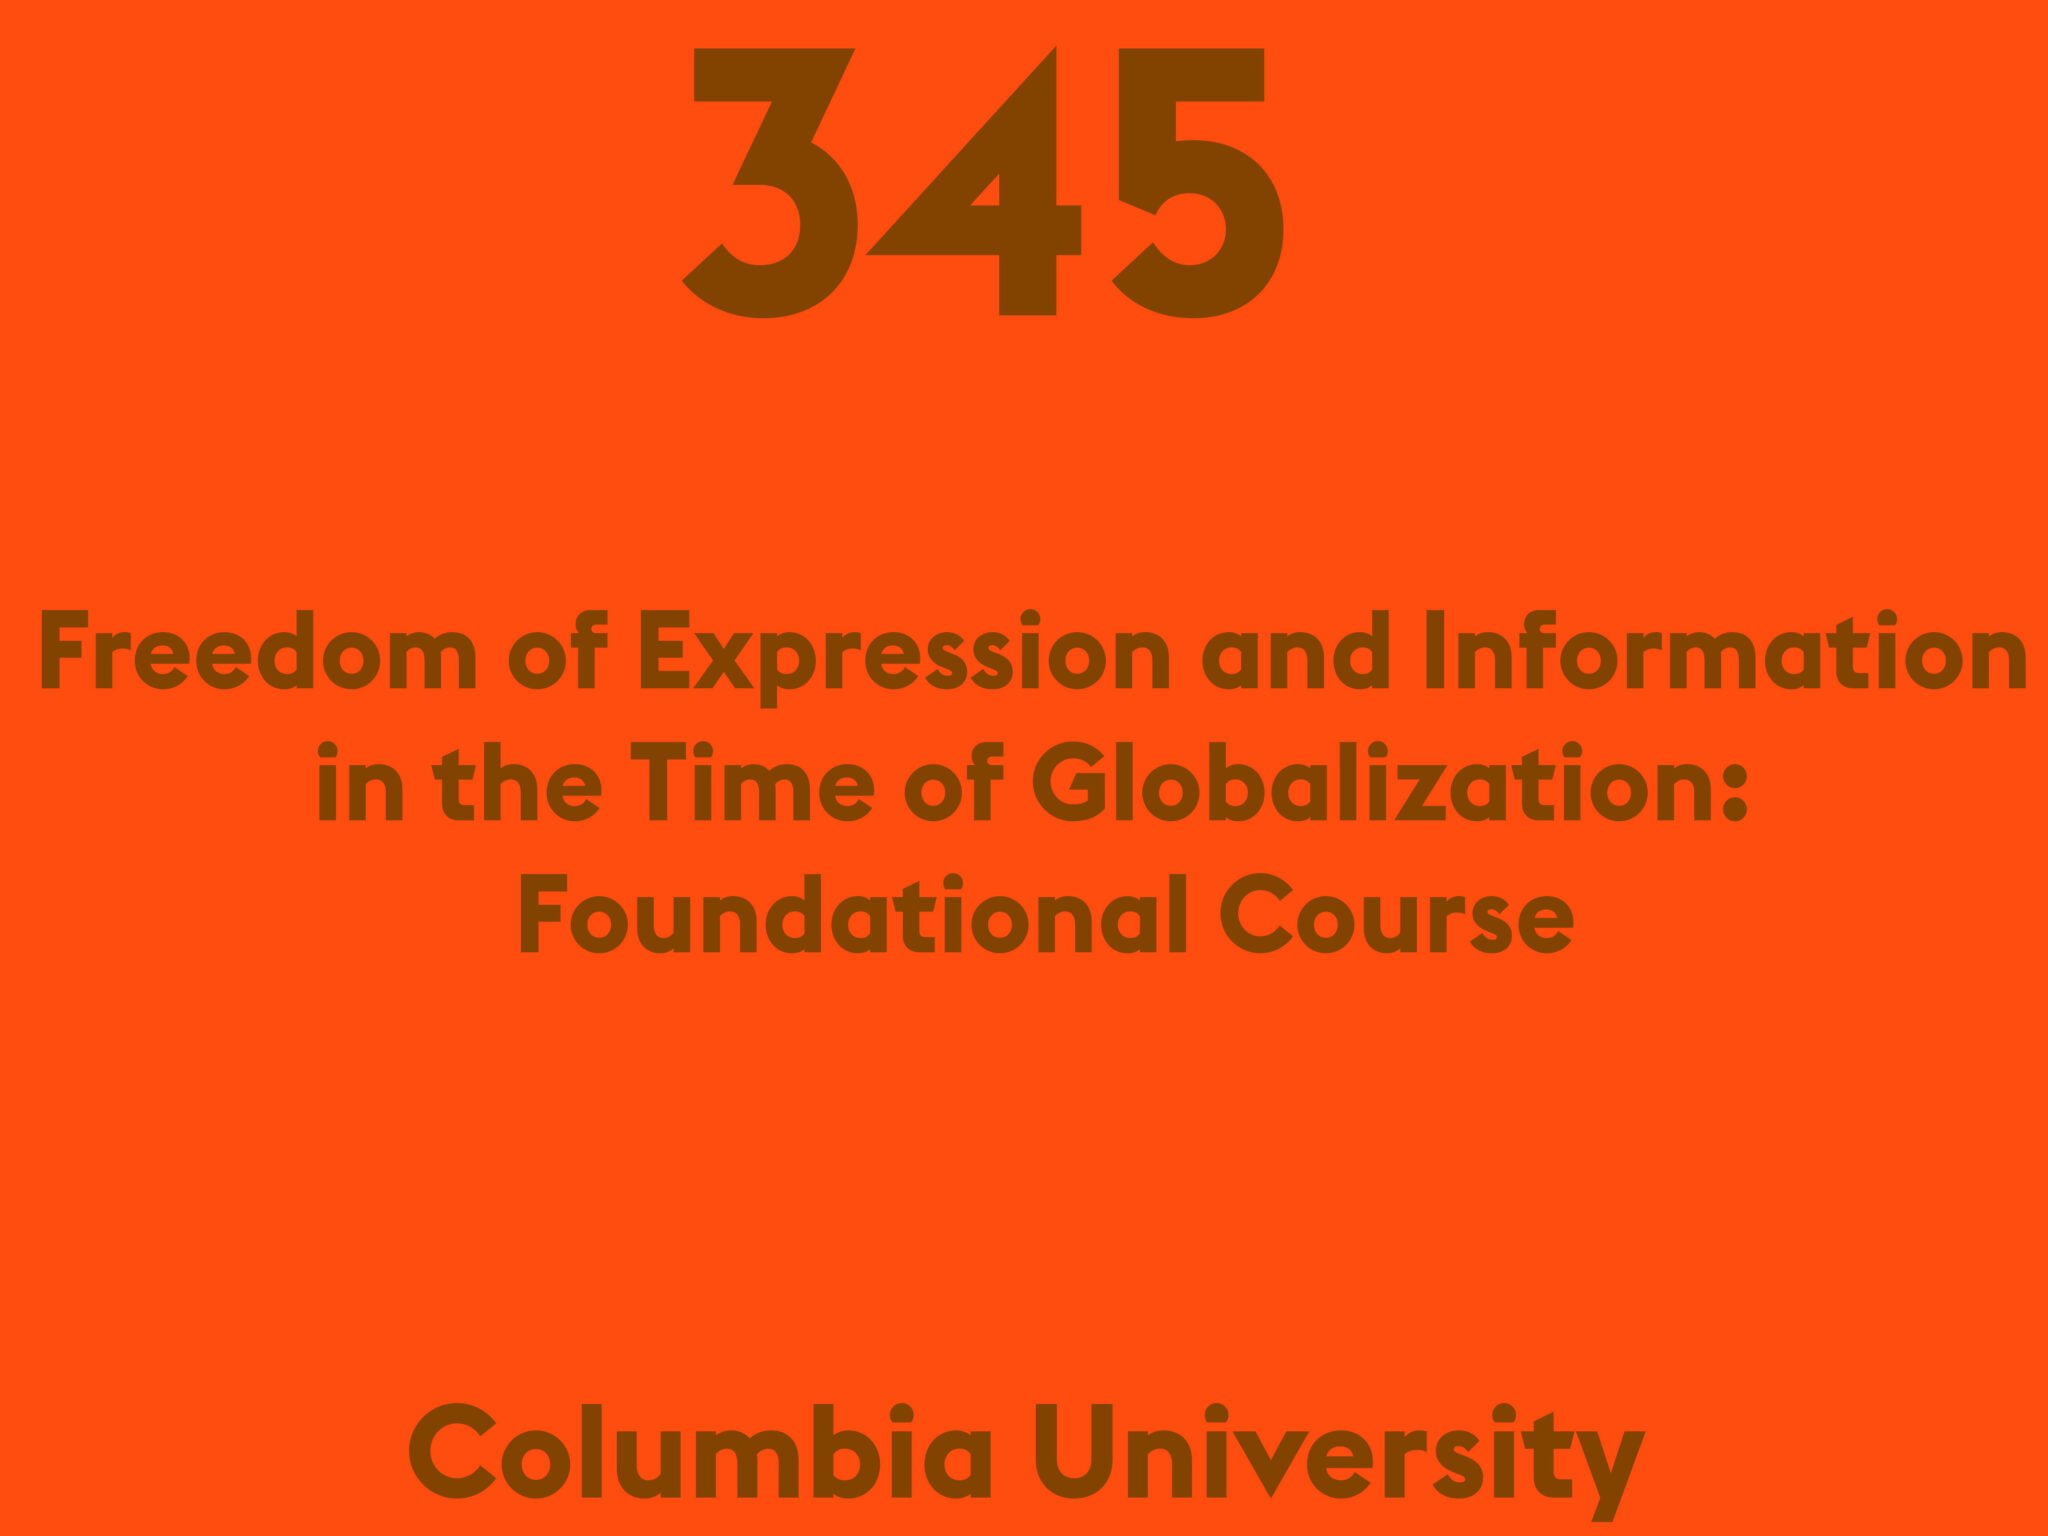 Freedom of Expression and Information in the Time of Globalization: Foundational Course